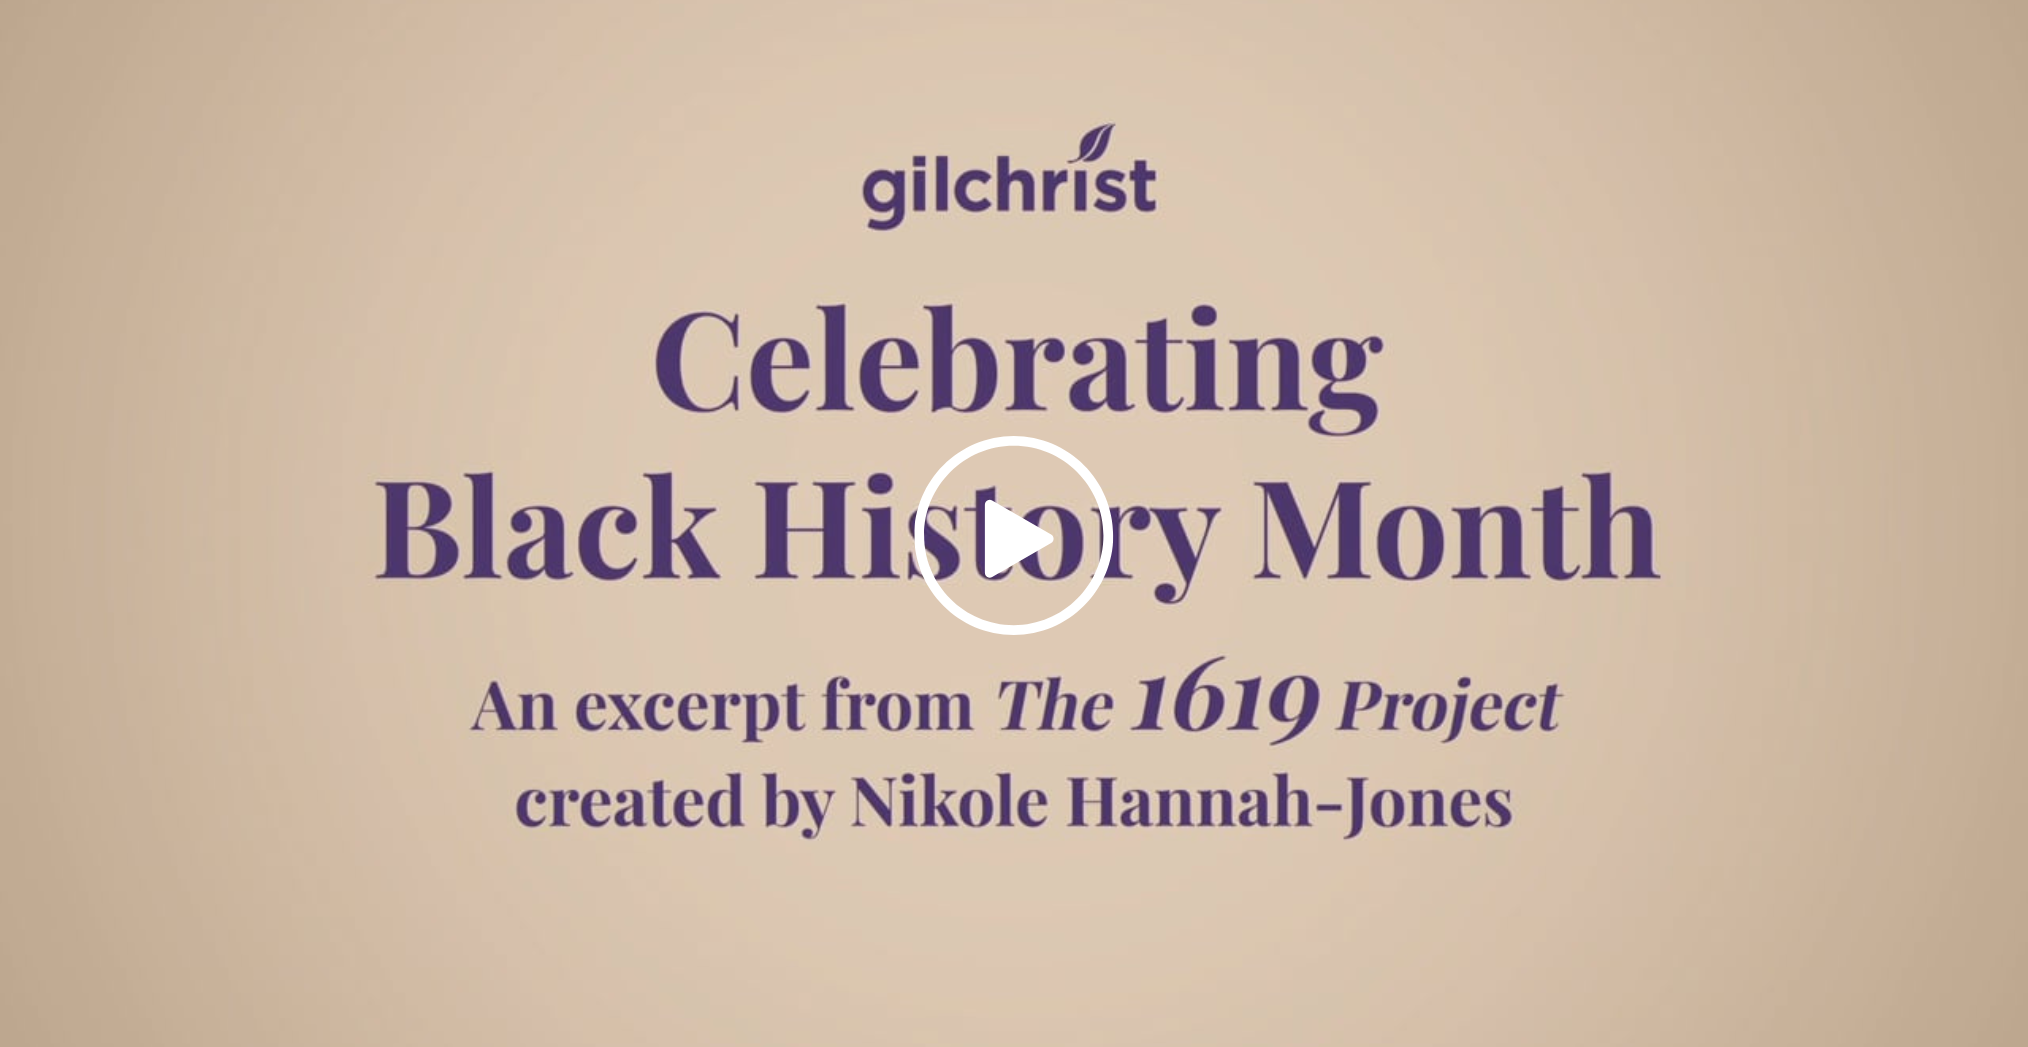 Gilchrist - Black History Month